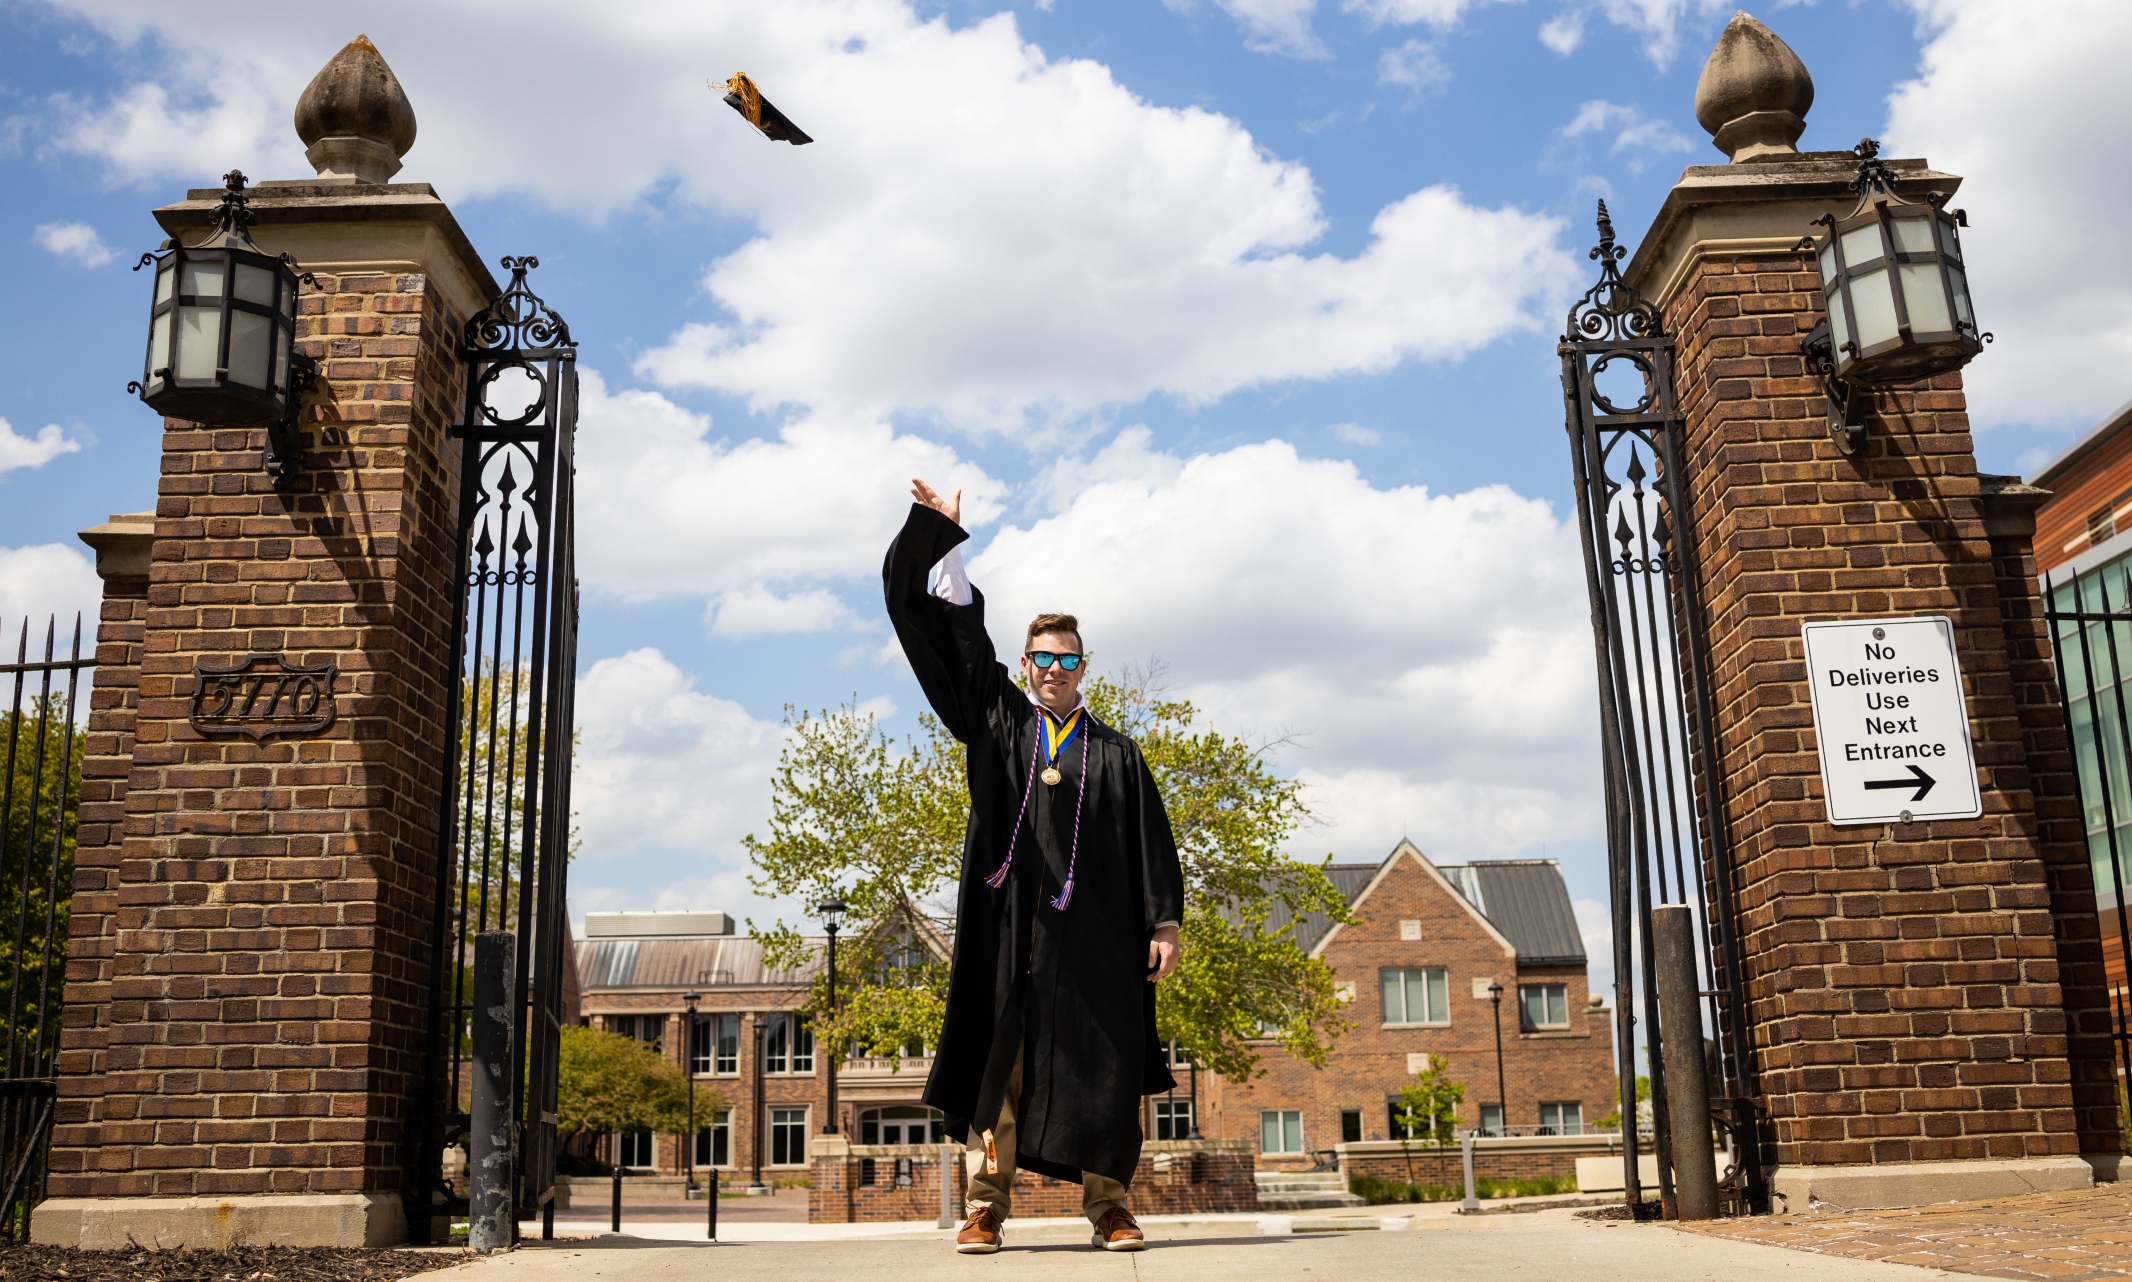 Henry Meeds stands at the center of the gate in front of Bloch Heritage Hall. He is dressed in commencement regalia and wearing sunglasses, throwing the graduation cap in the air.